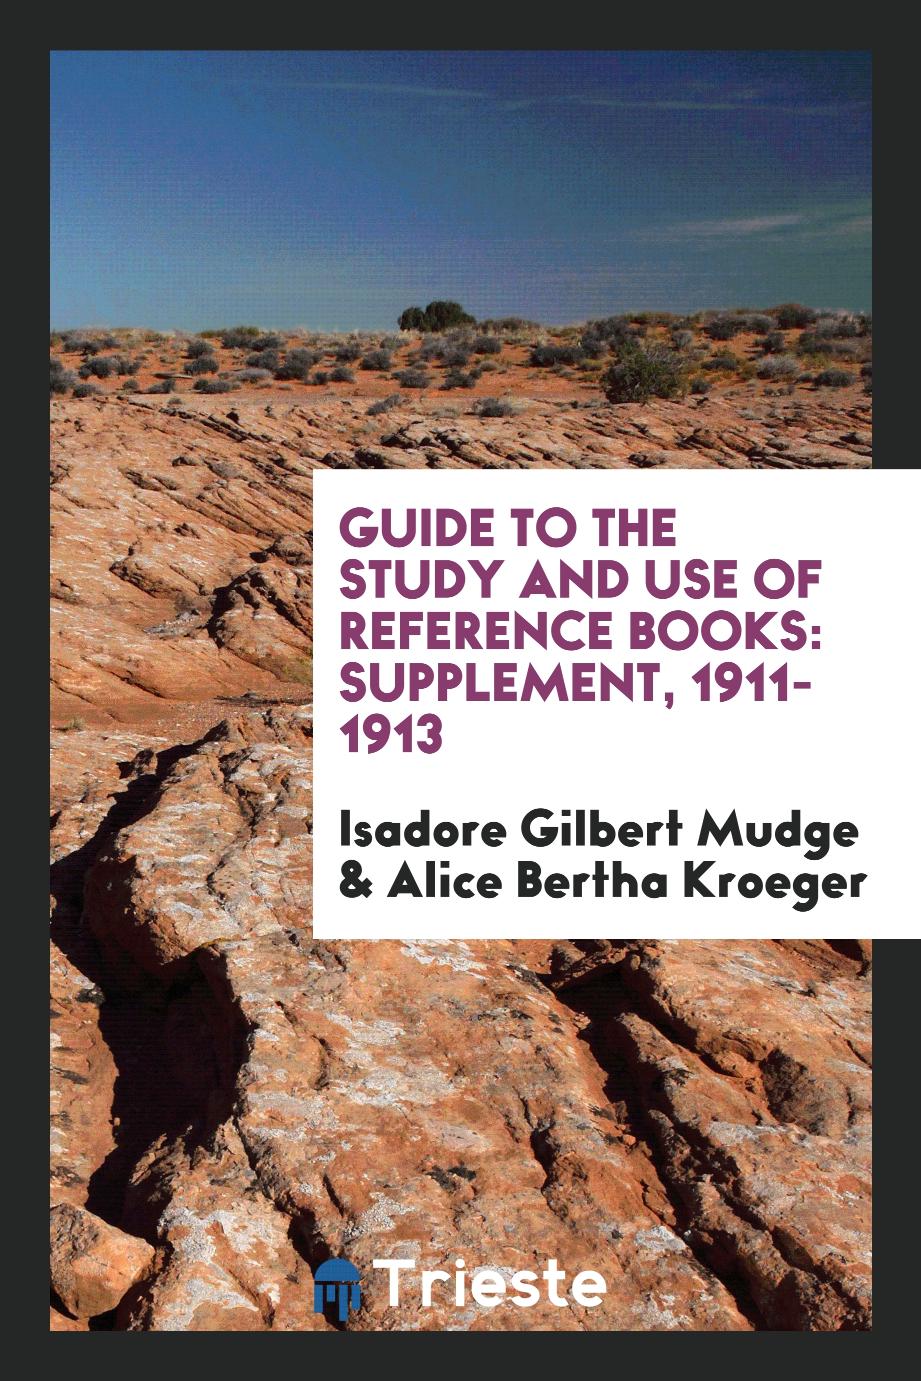 Guide to the Study and Use of Reference Books: Supplement, 1911-1913